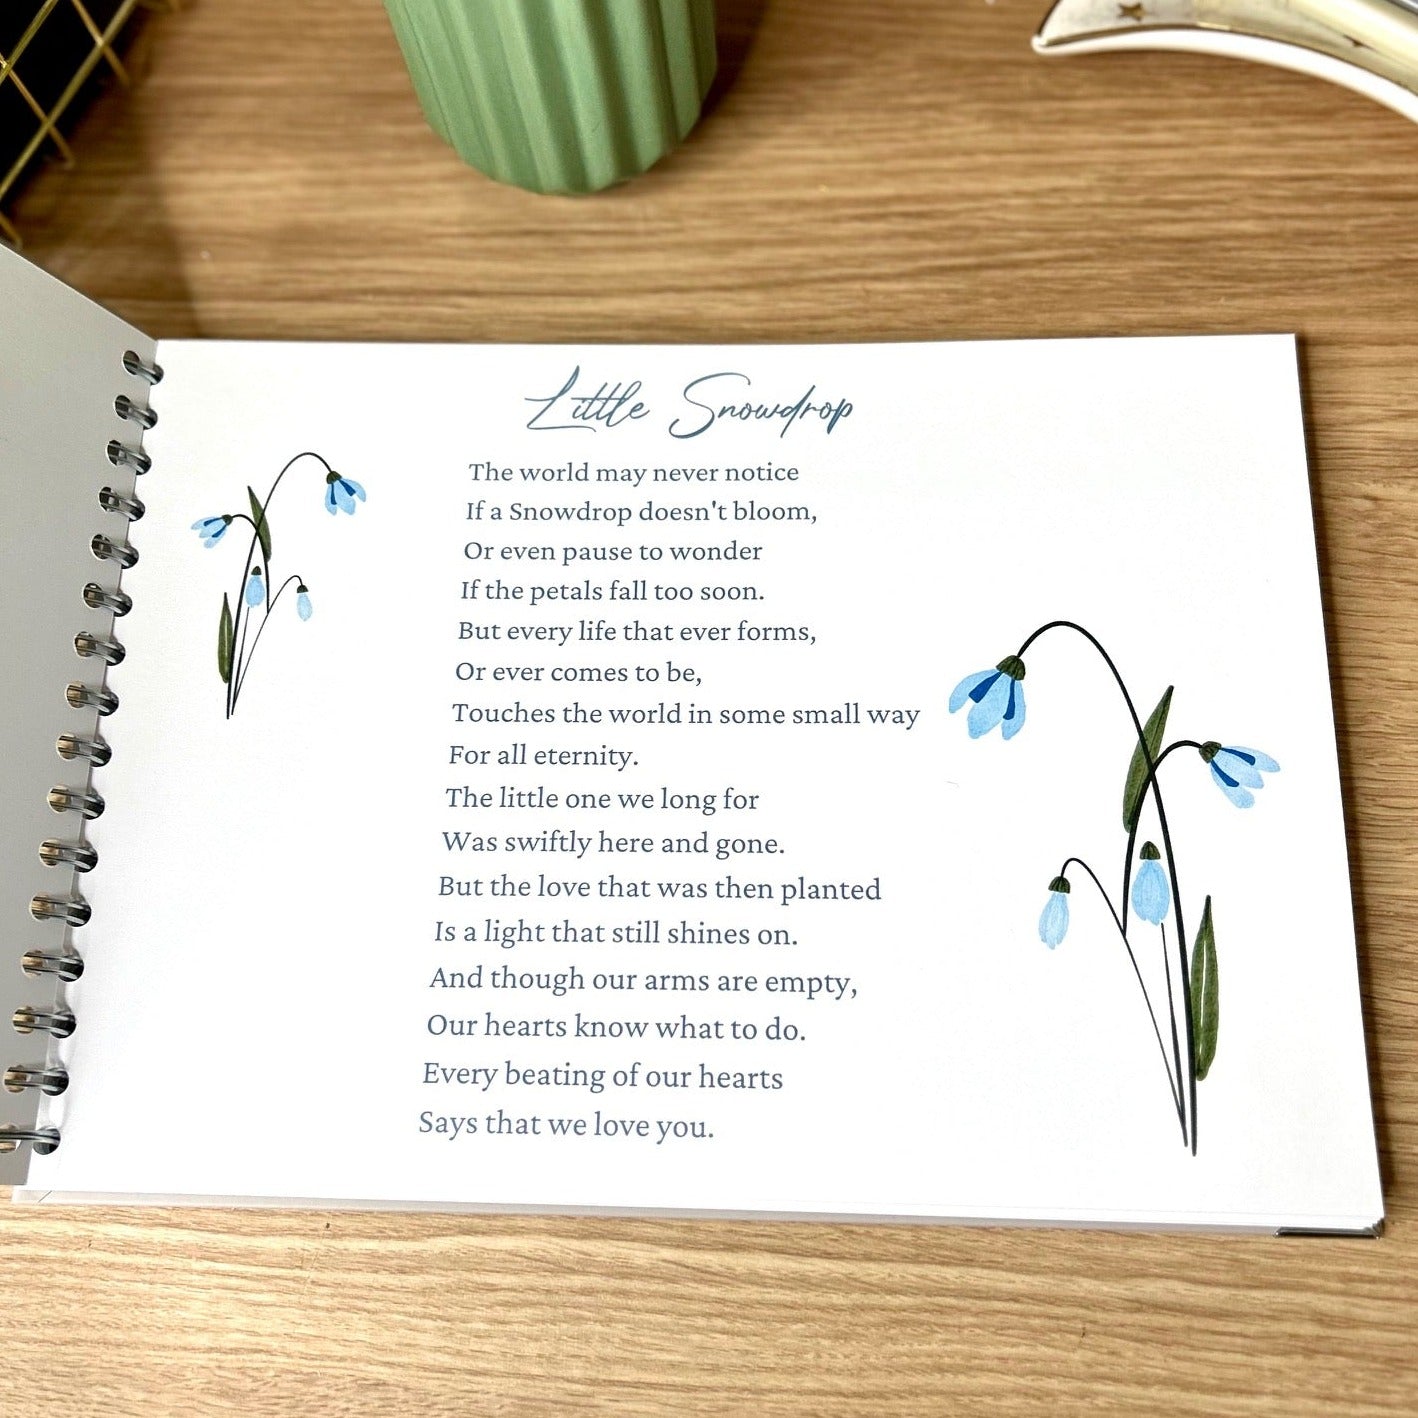 A poem called 'Little Snowdrop is printed on the first oage of an A4 memory book with two images of Snowdrop flowers next to it